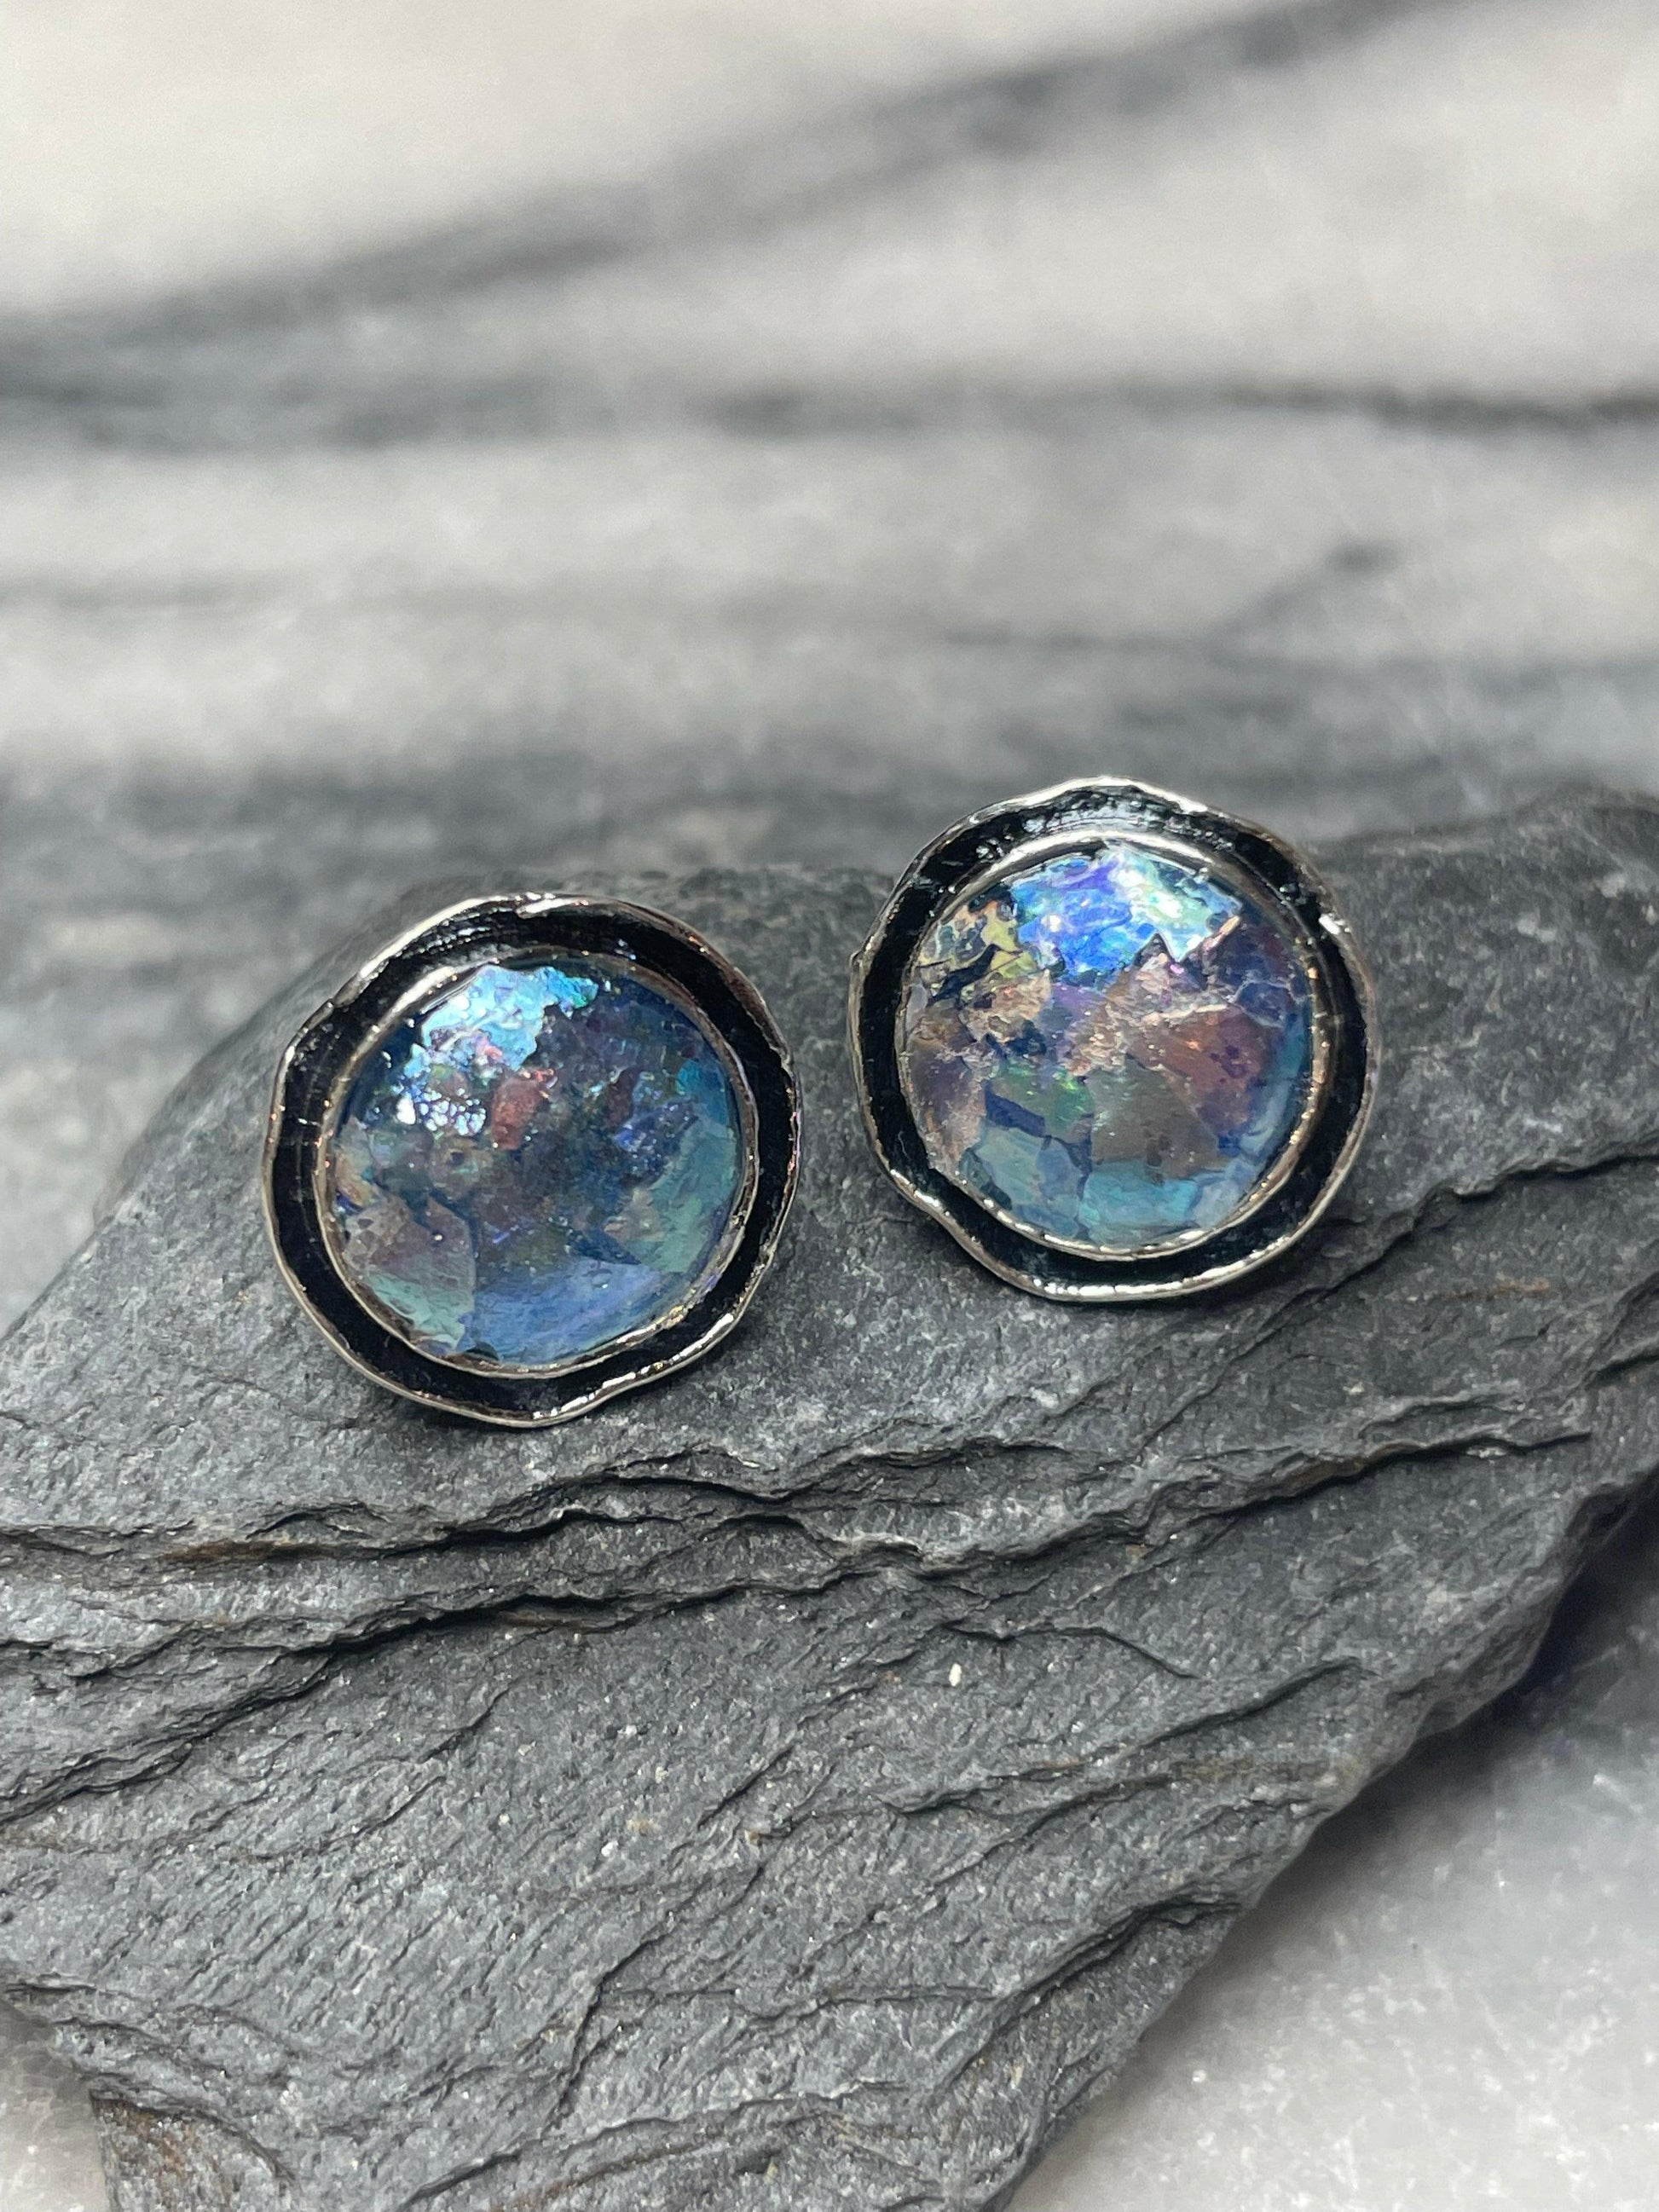 Roman Glass Stud Earrings, Round Oxidized authentic Roman Glass from Israel Chrisitan Gift Idea, Unique faith based jewelry